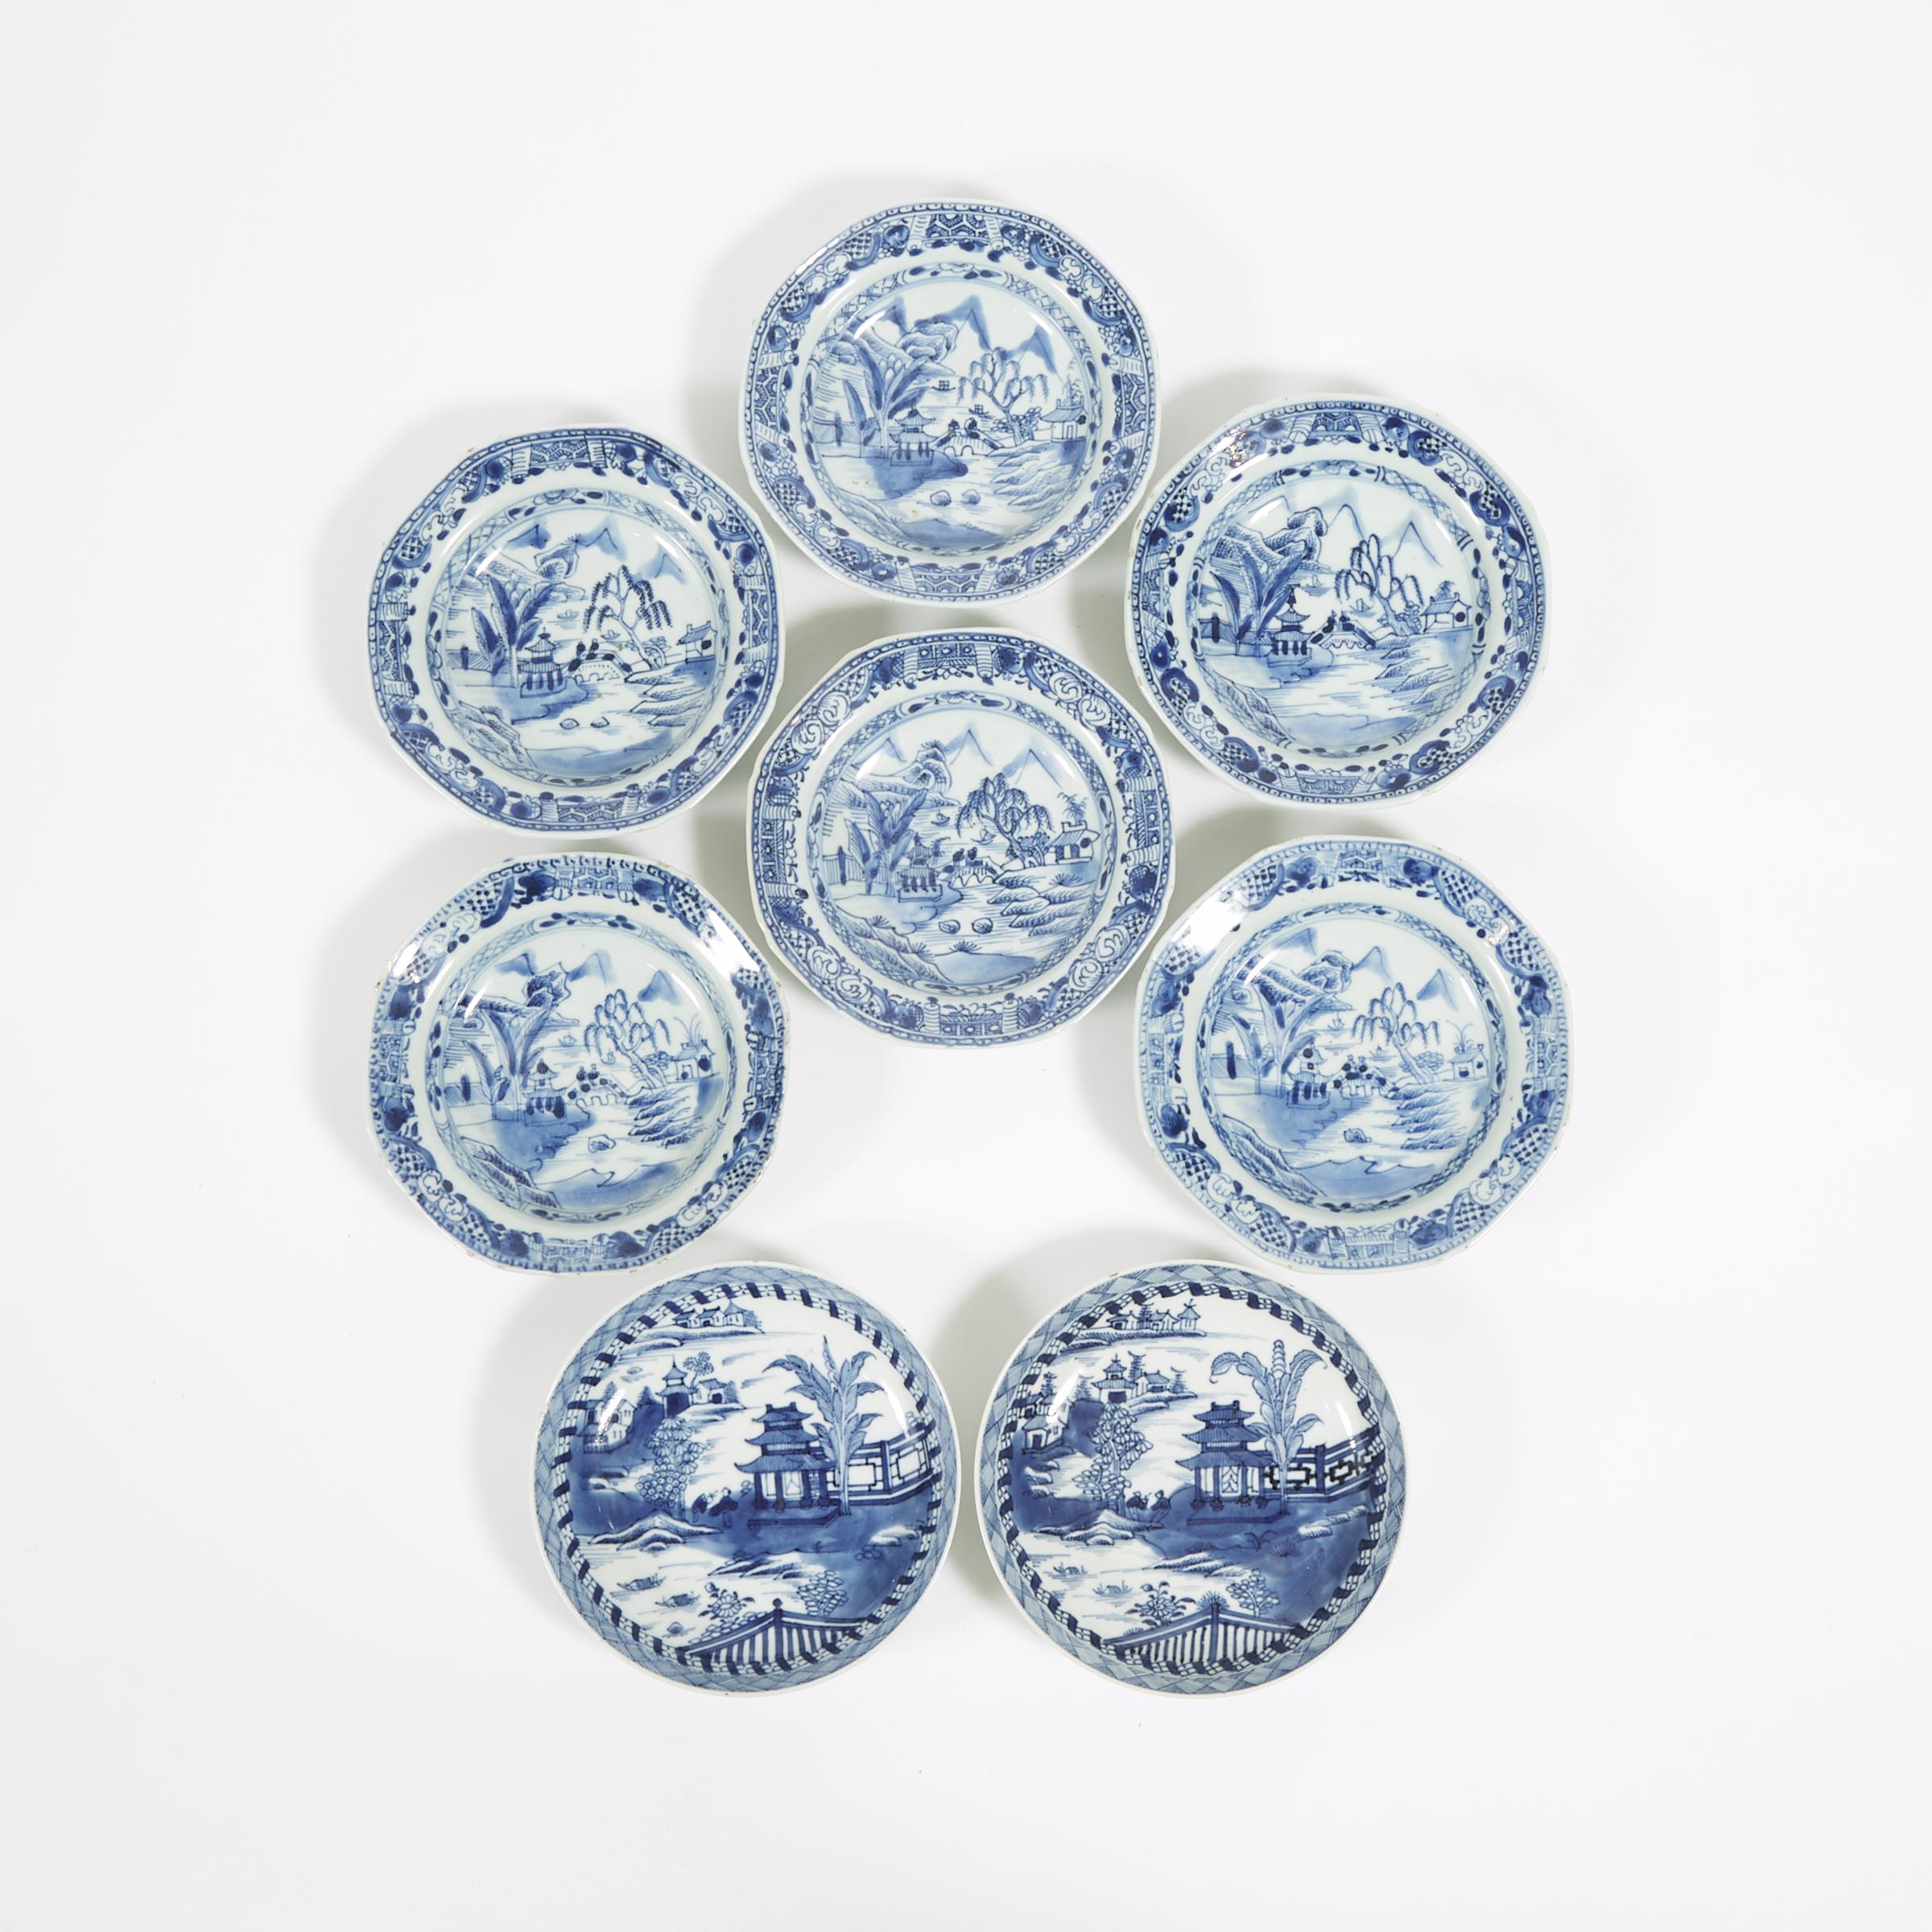 A Set of Six Octagonal Blue and White 'Scholar and Bridge' Dishes, Together With a Pair of 'Pavilion' Dishes, 18th Century